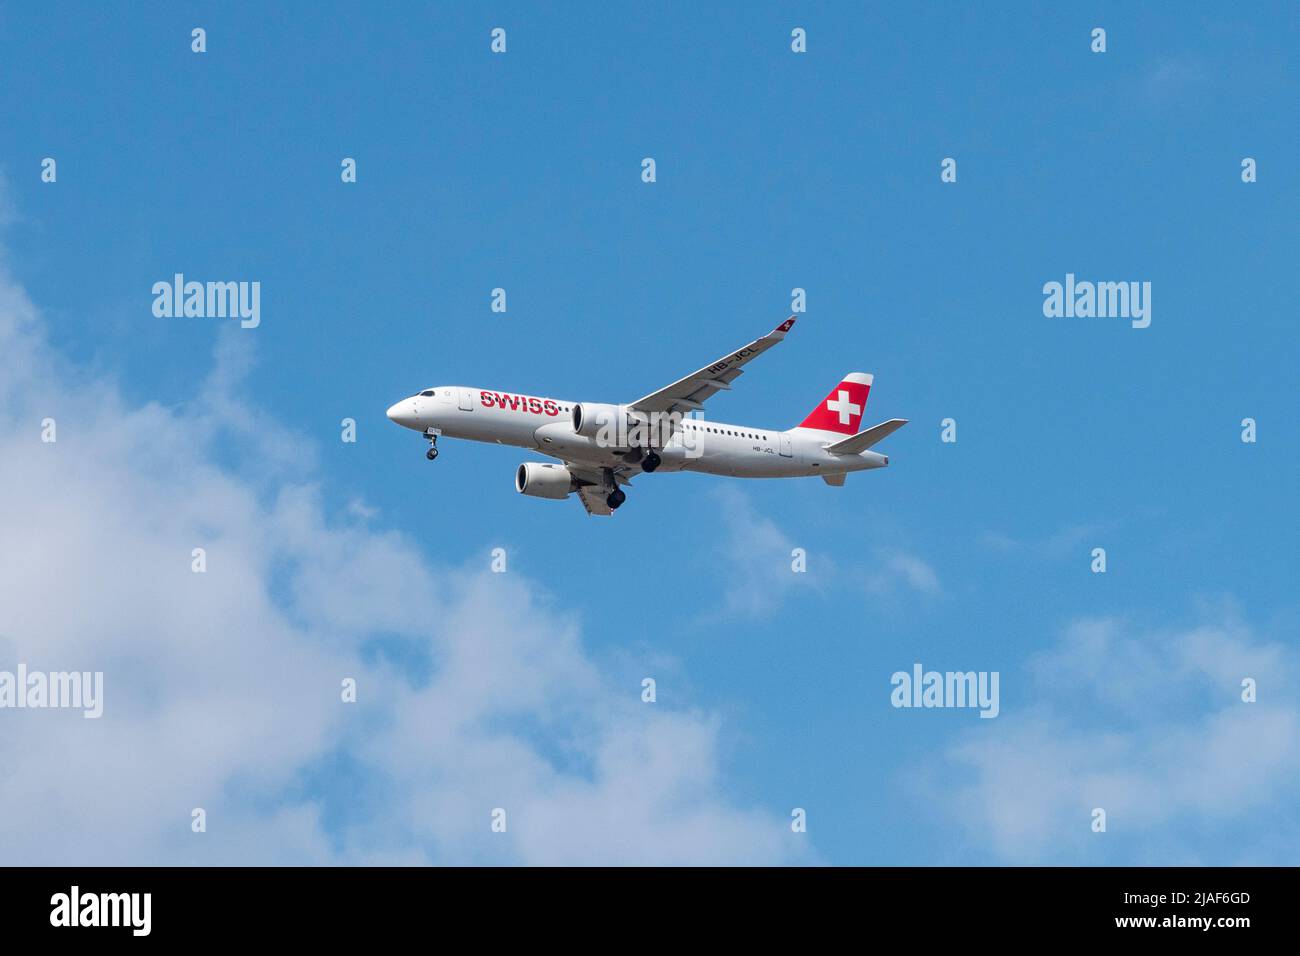 A Swiss Air Airbus A220-300 (HB-JCL) on approach to London Heathrow airport, UK. Stock Photo